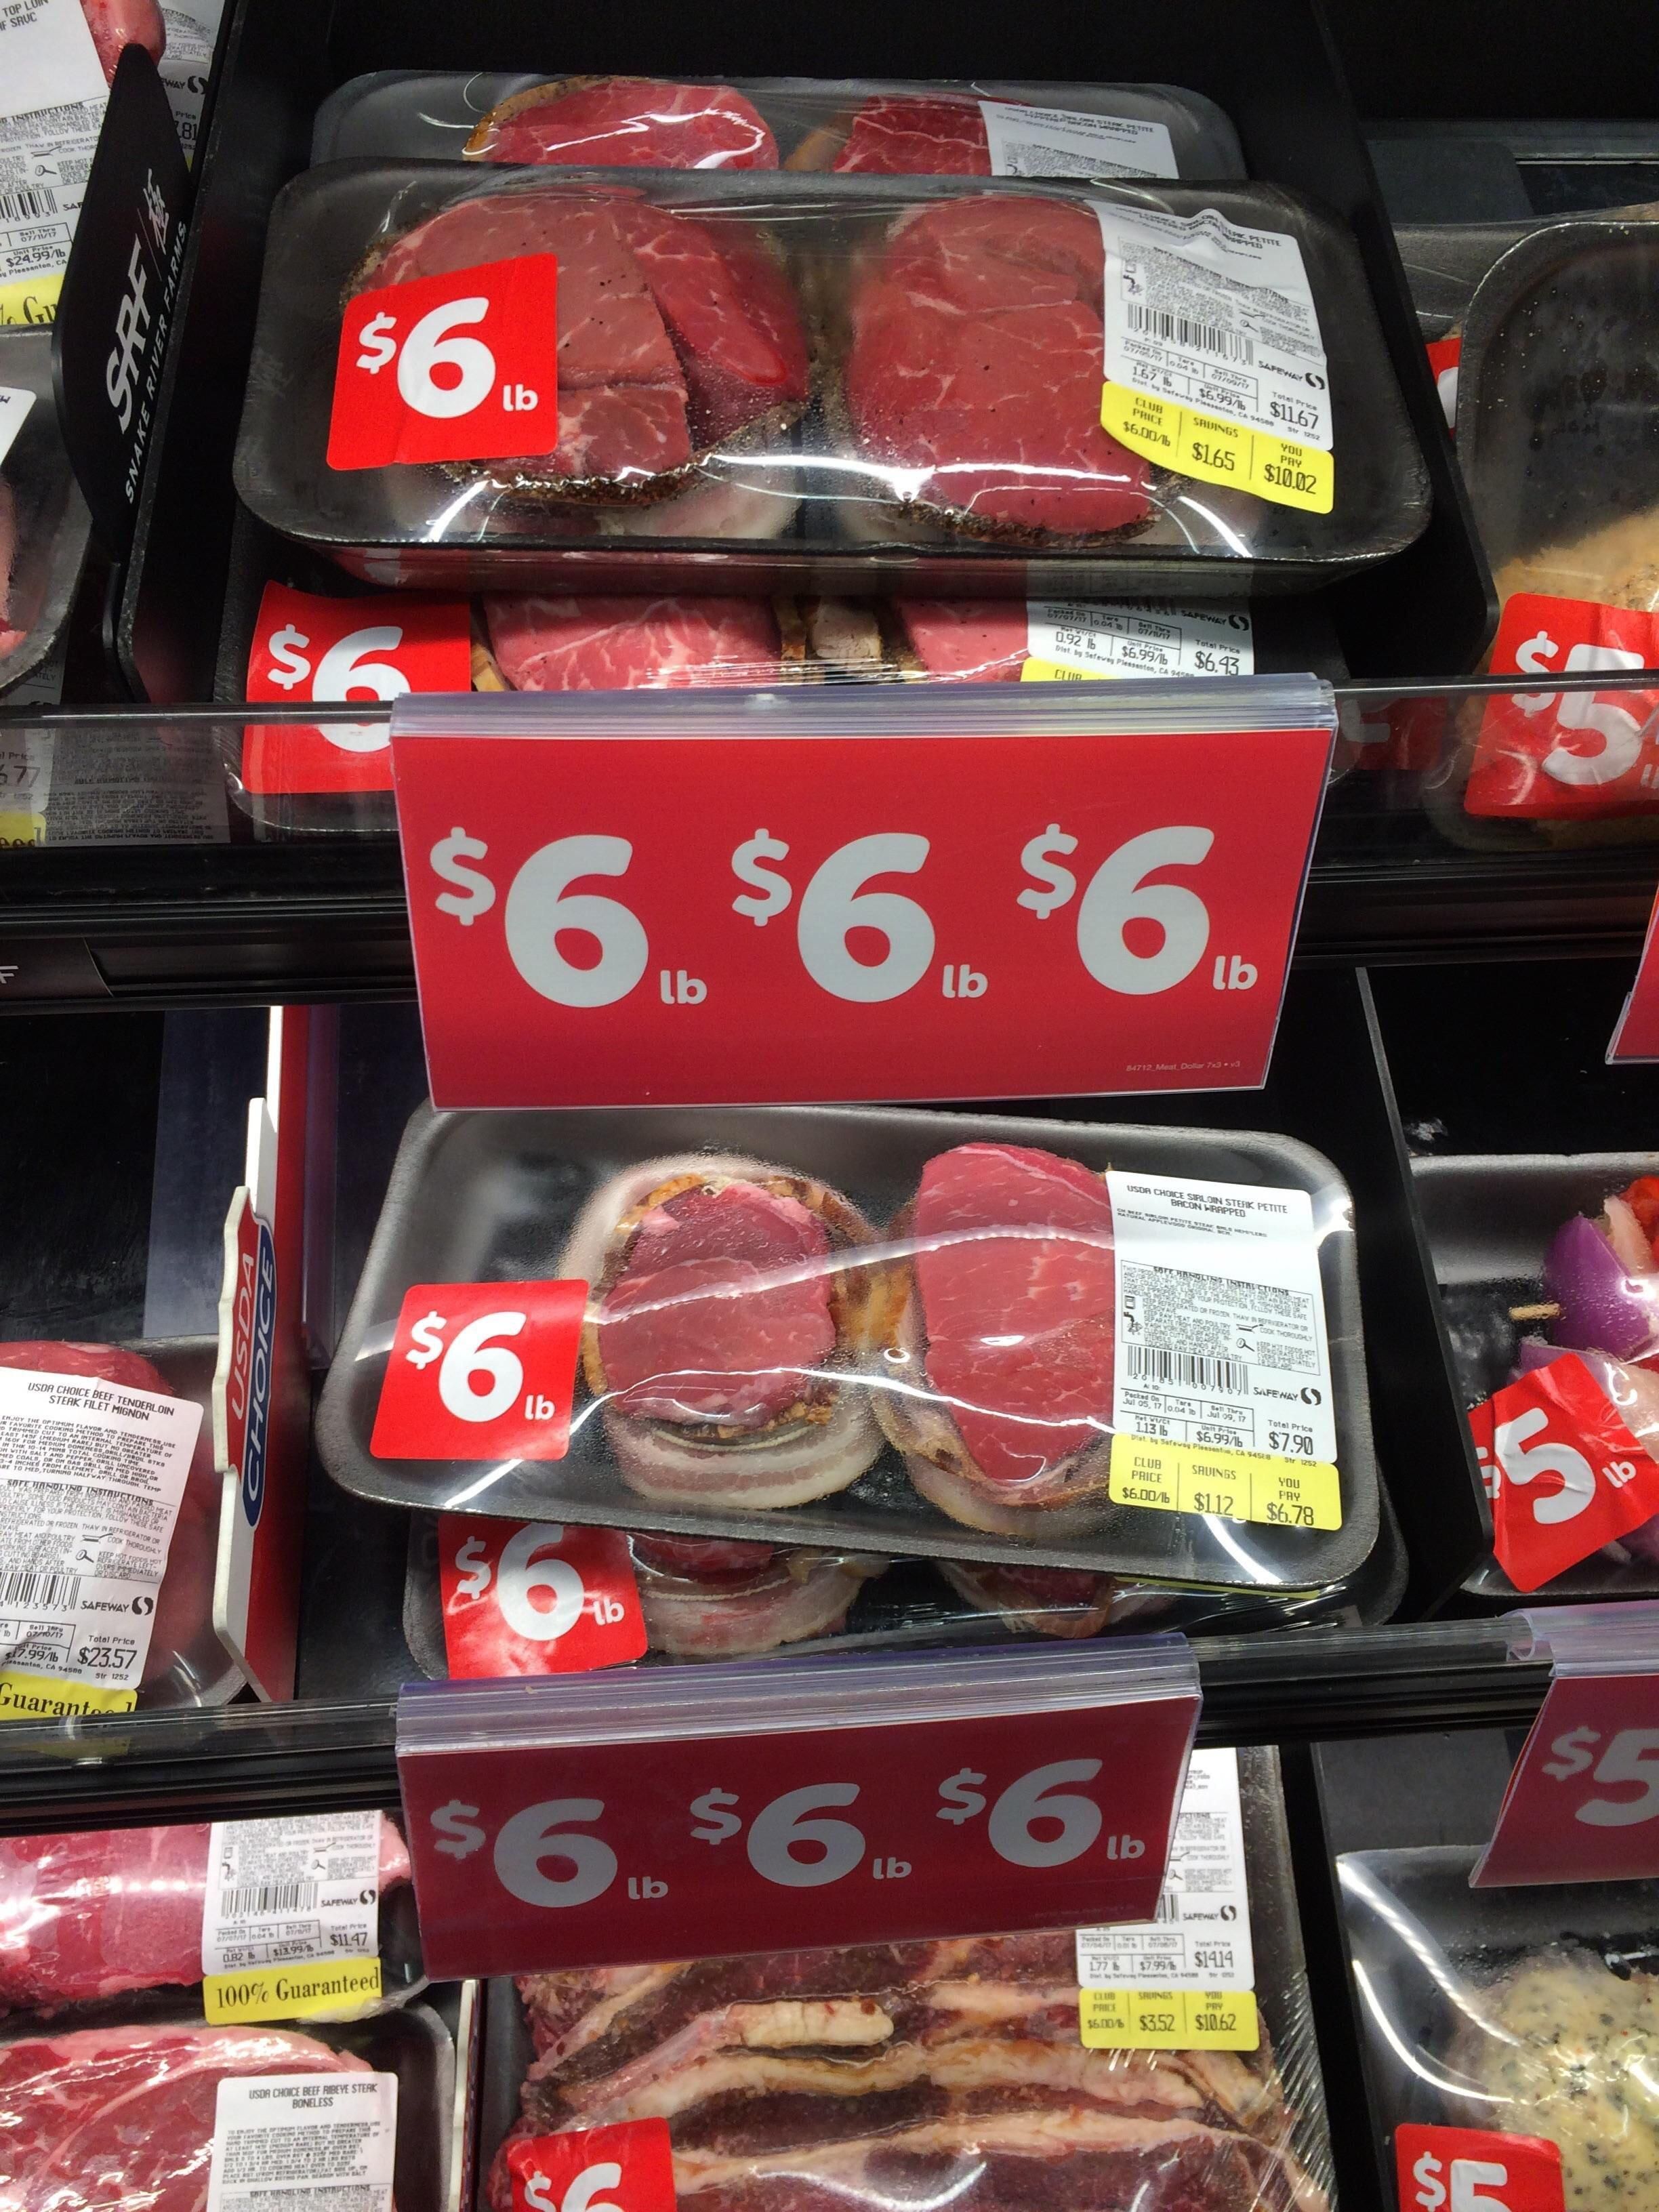 666 The Number of the Beef.